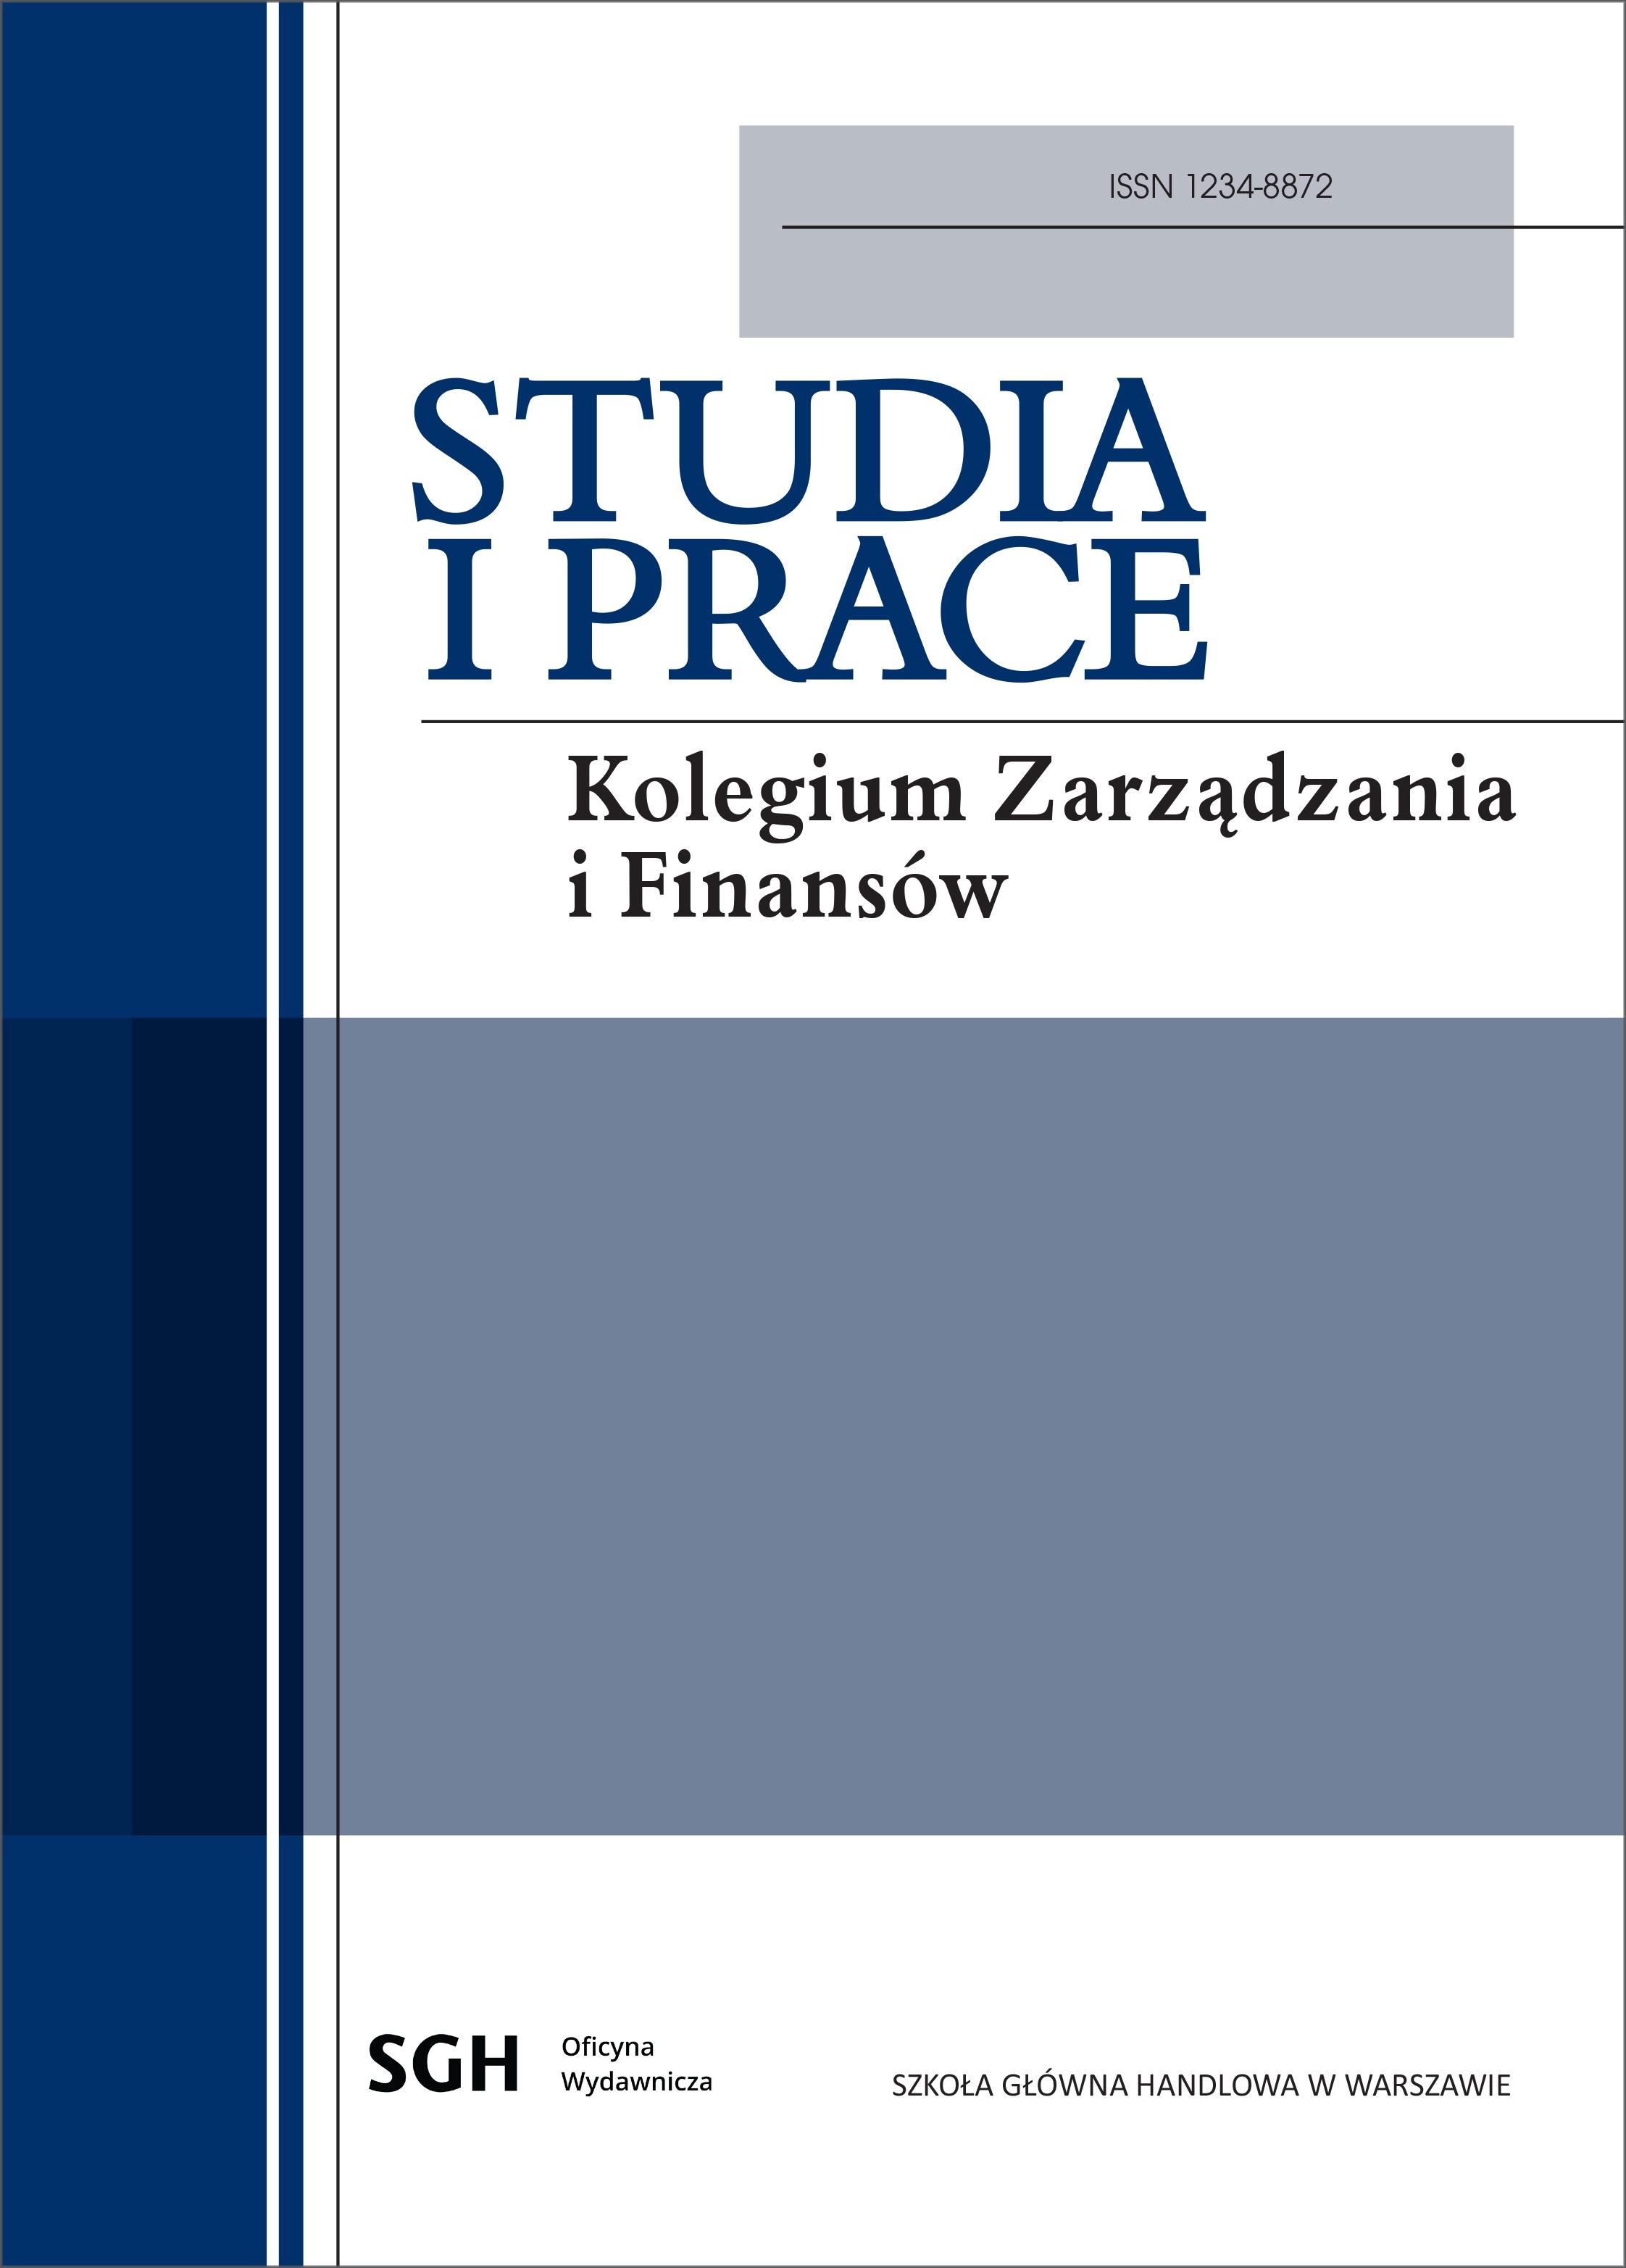 Crisis-Proof Innovation: Organizational Culture, Planning
and Innovation of Polish Companies in the Age of the Pandemic Cover Image